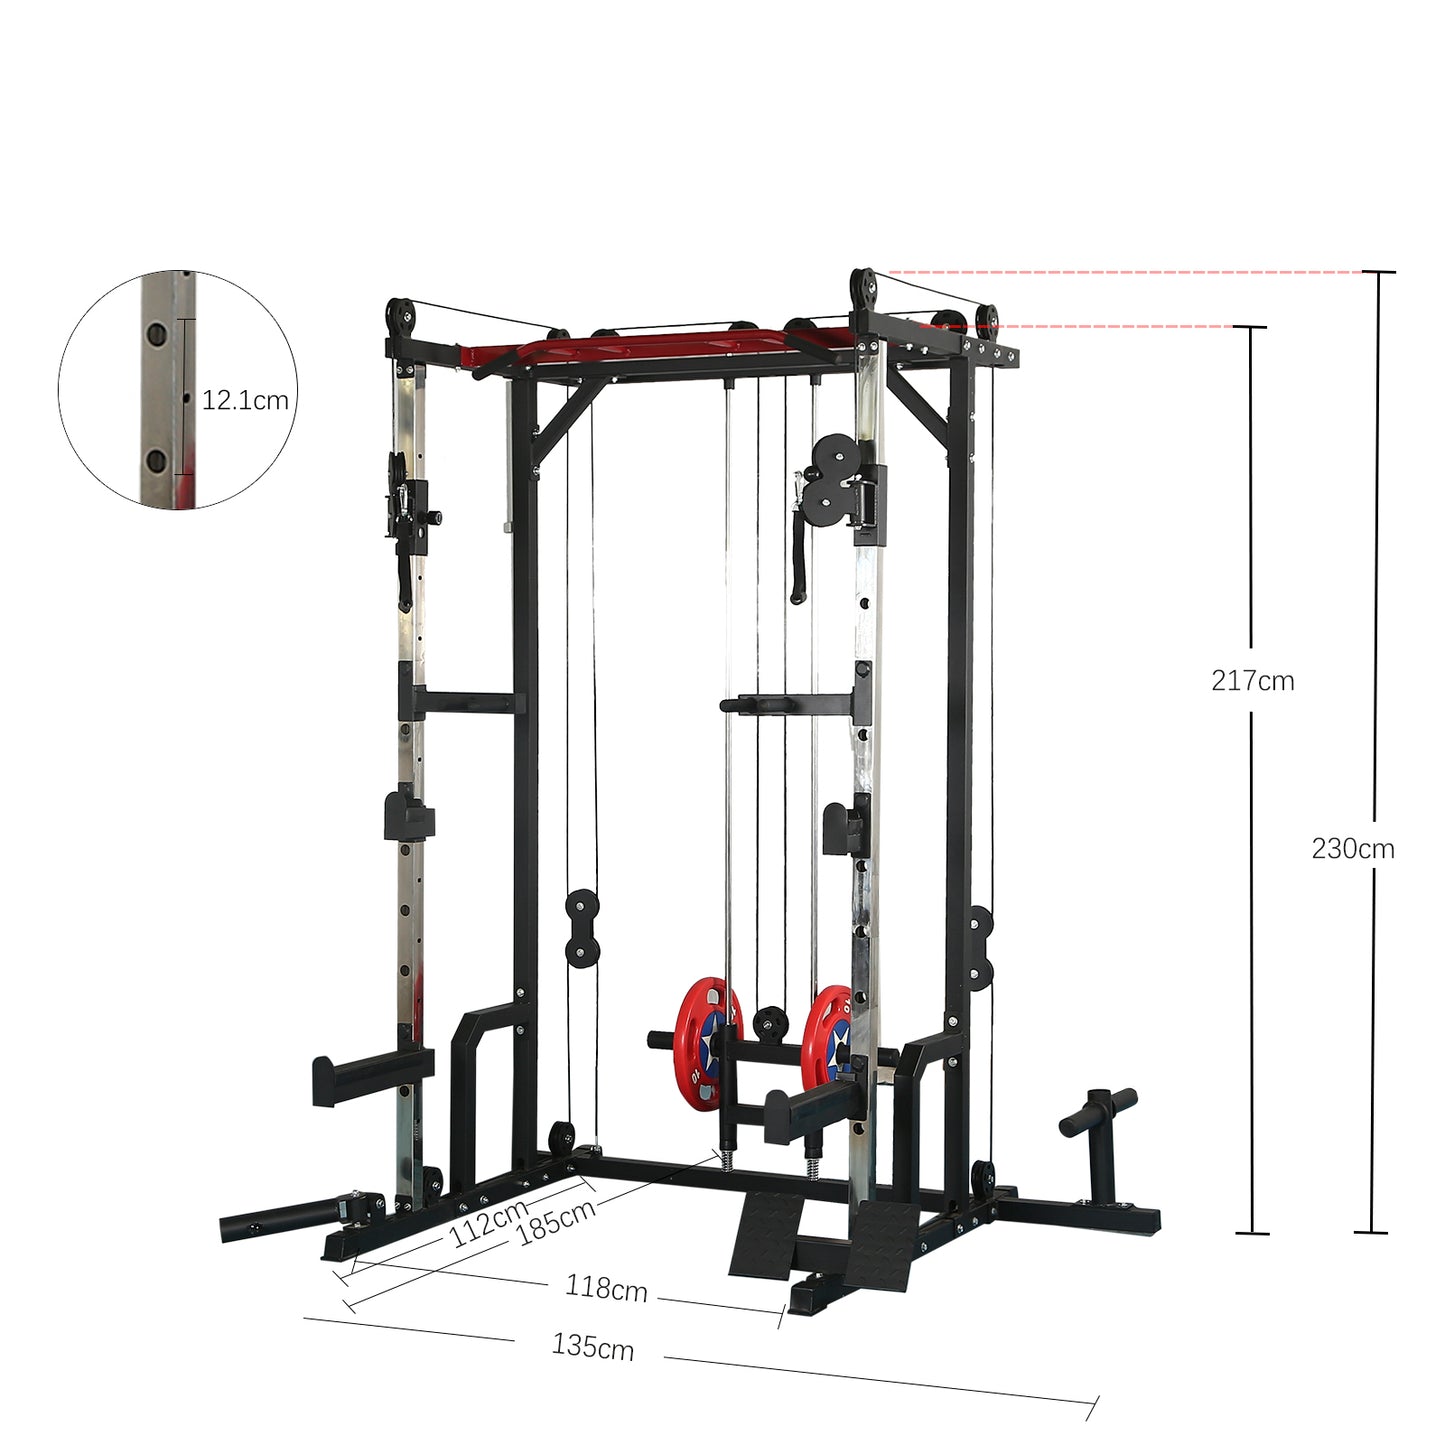 Power cage with LAT PullDown and Weight Storage Rack Optional Weight Bench, 1400 lb Capacity Power Rack for Home and Garage Gyms, Multiple Accessory Squat Racks for Full Body Workouts